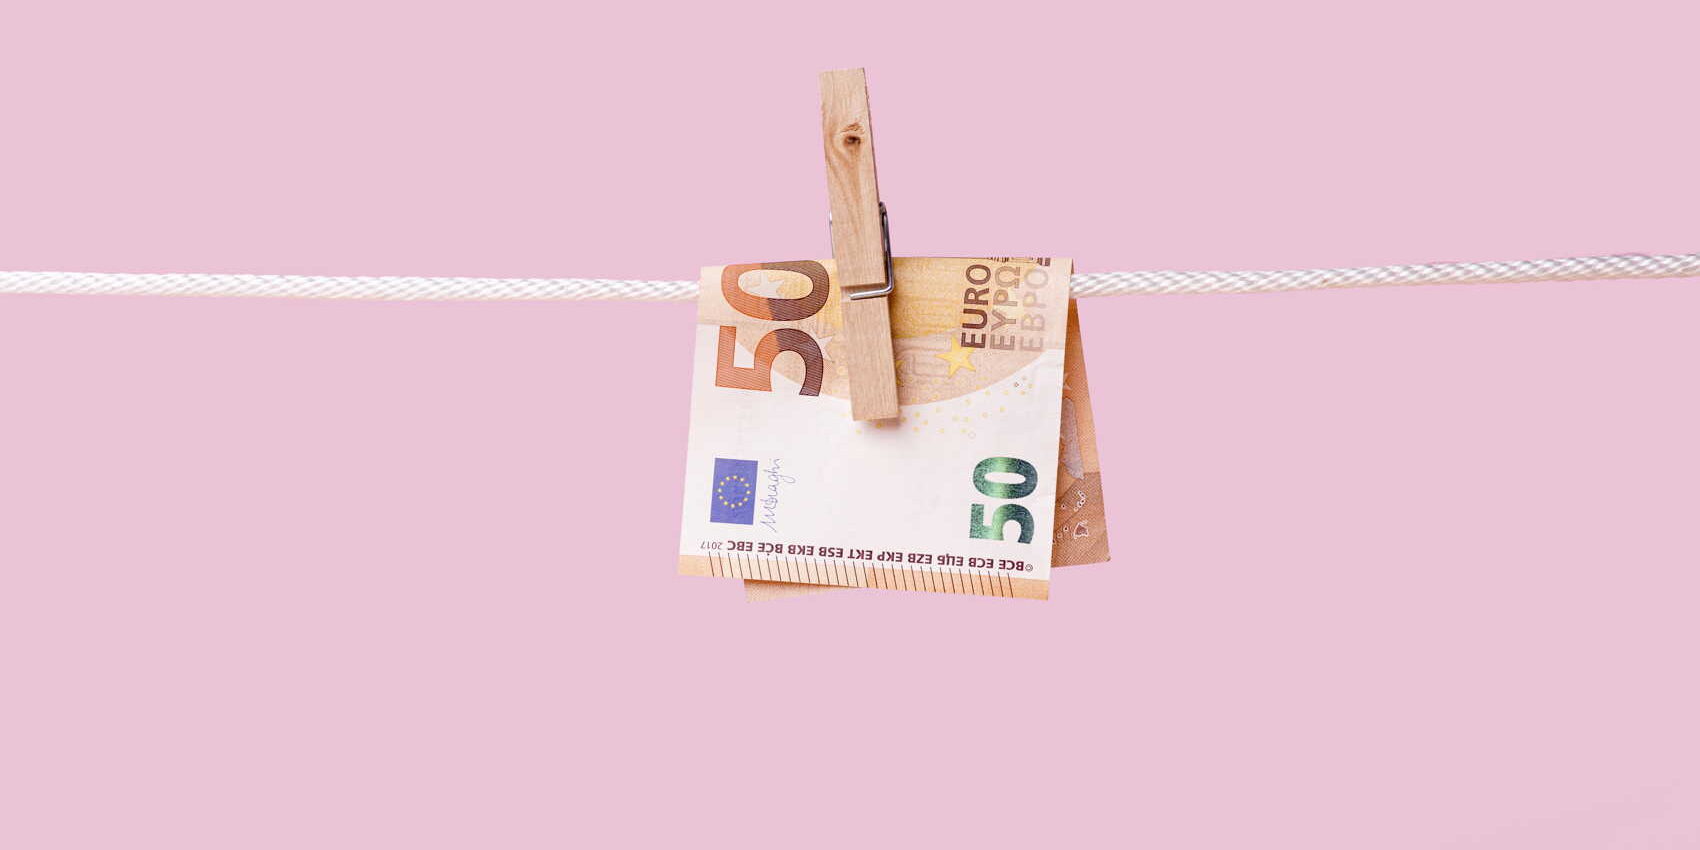 pranie_front-view-banknotes-held-by-clothing-pin-rope-vfconferences.pl